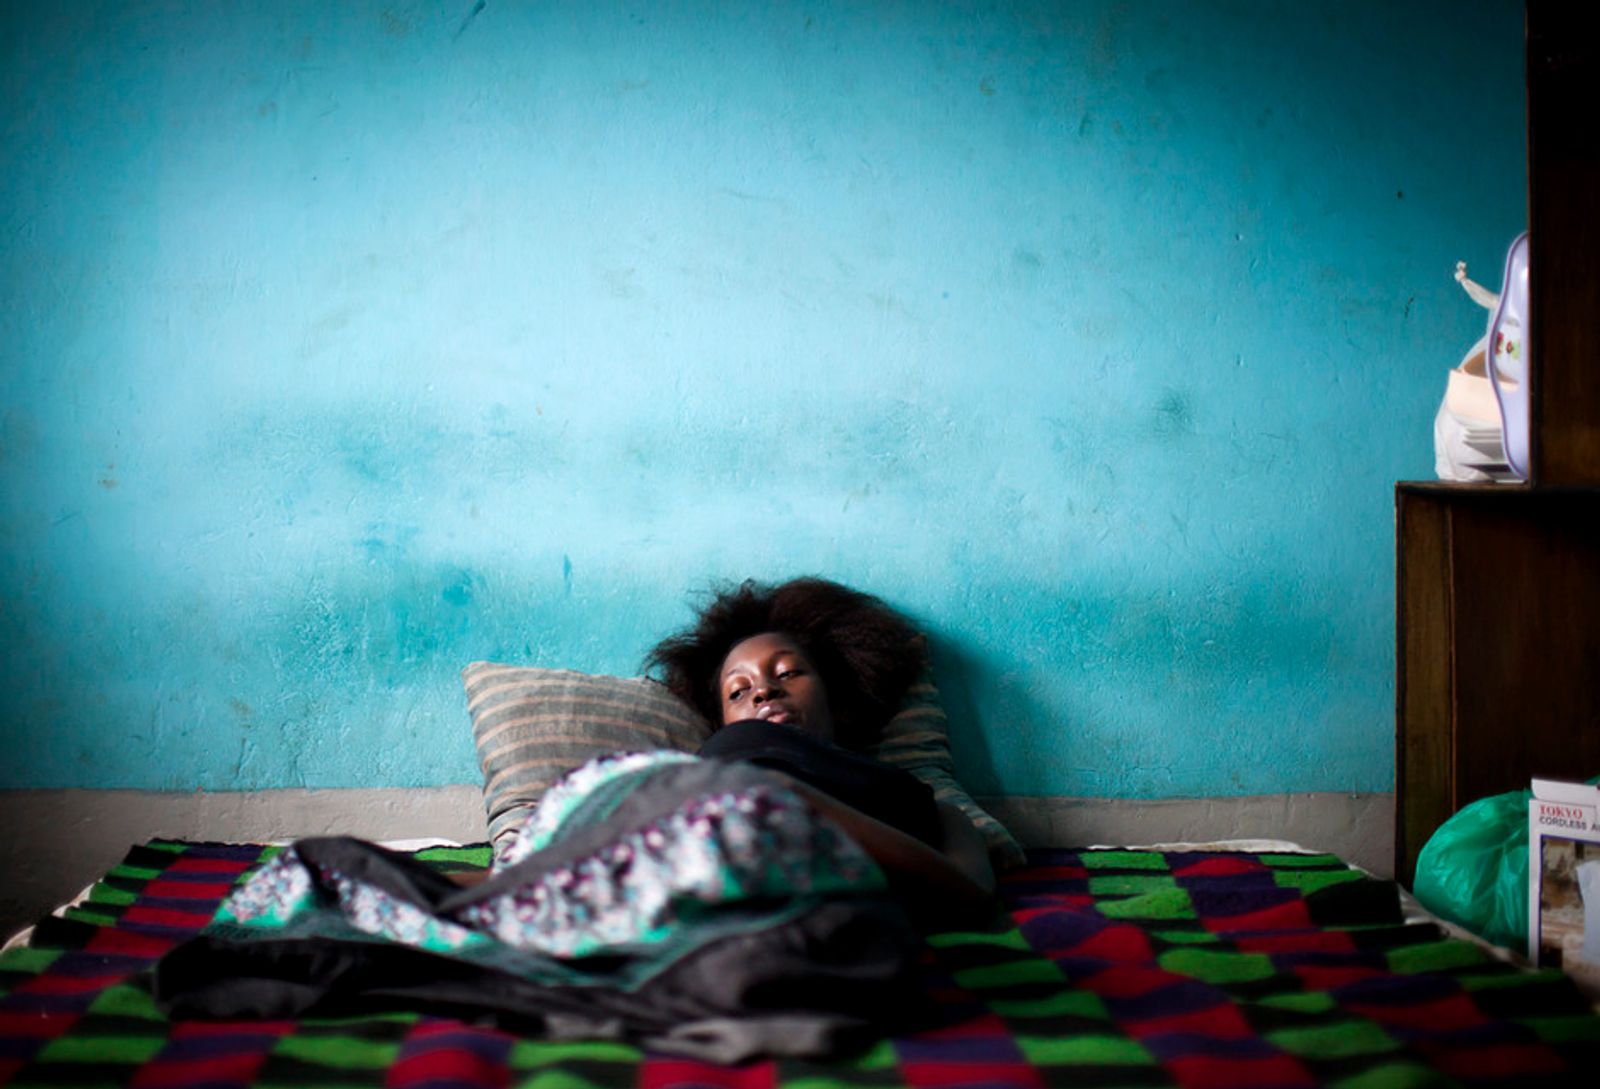 © Anne Ackermann - Shidda, a student, dozes in her bedroom. She shares a small place with her boyfriend.